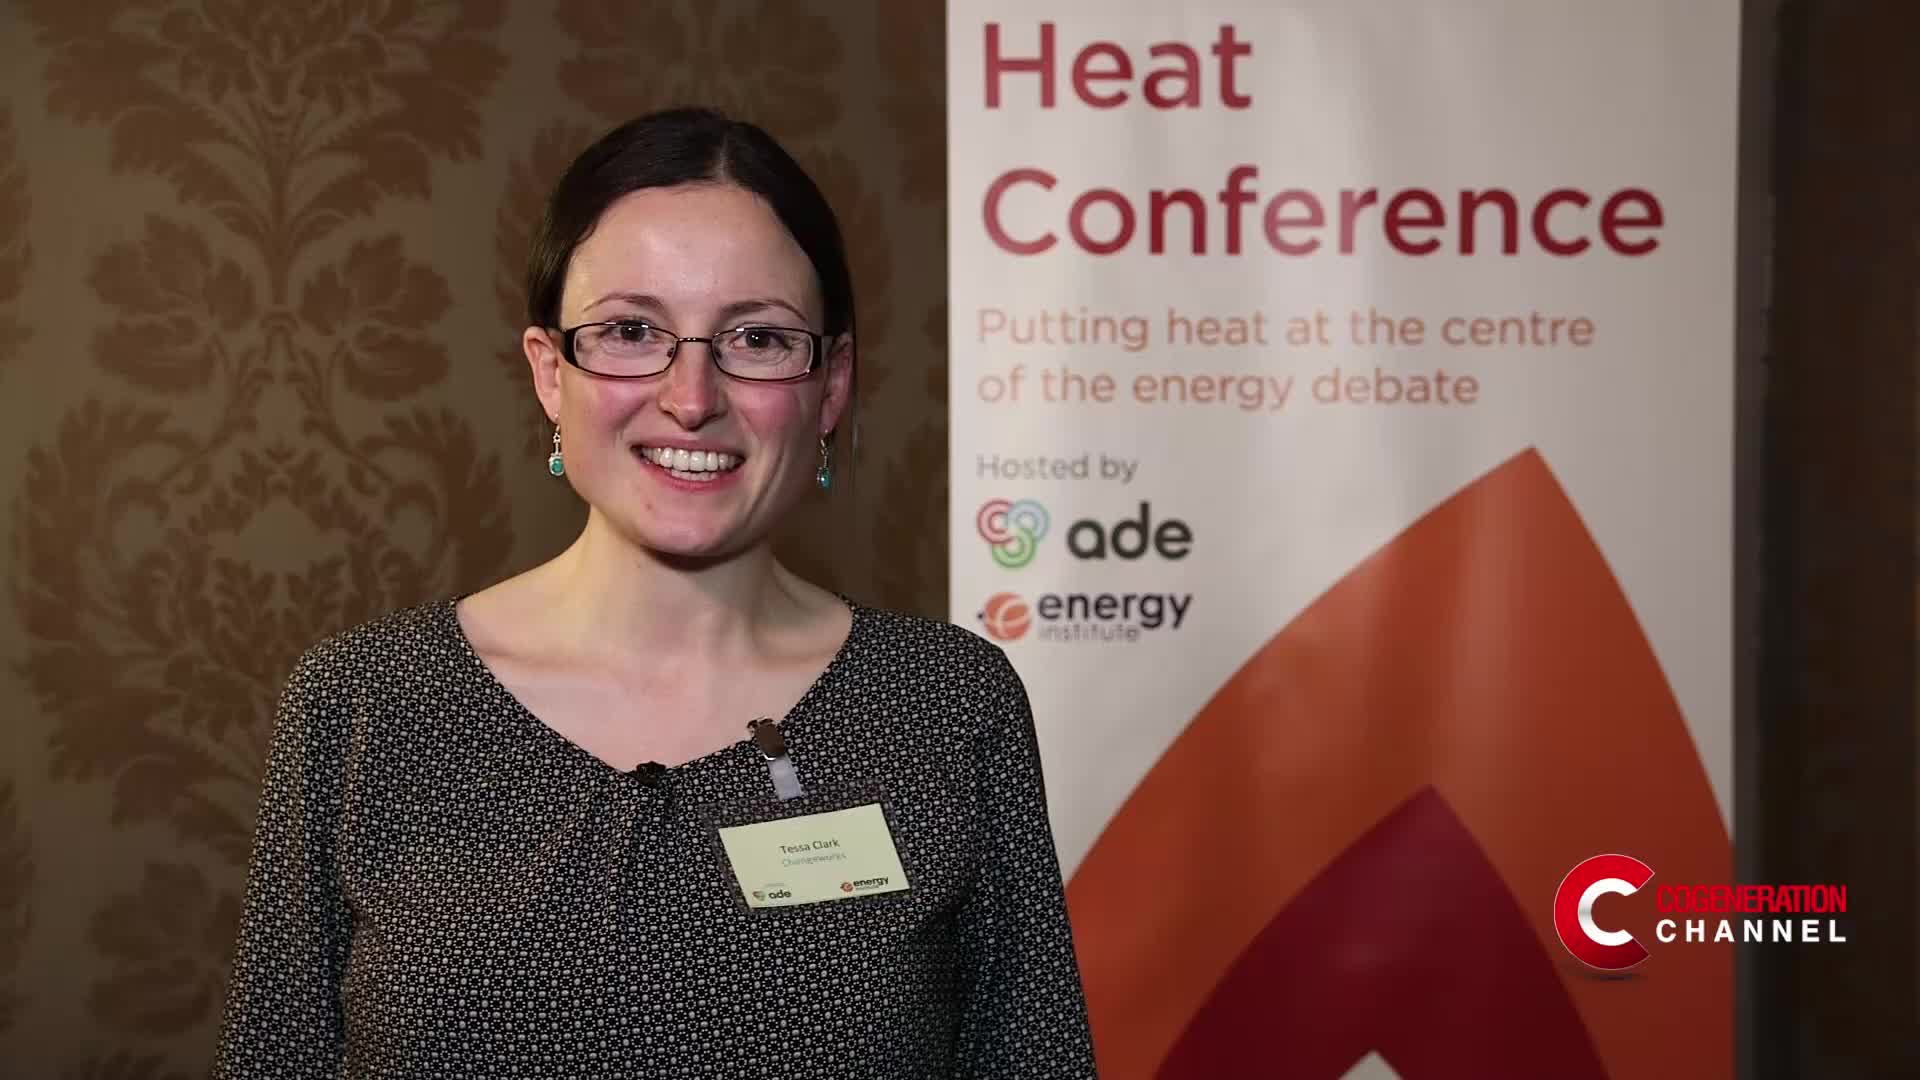 District heating as an opportunity for local communities